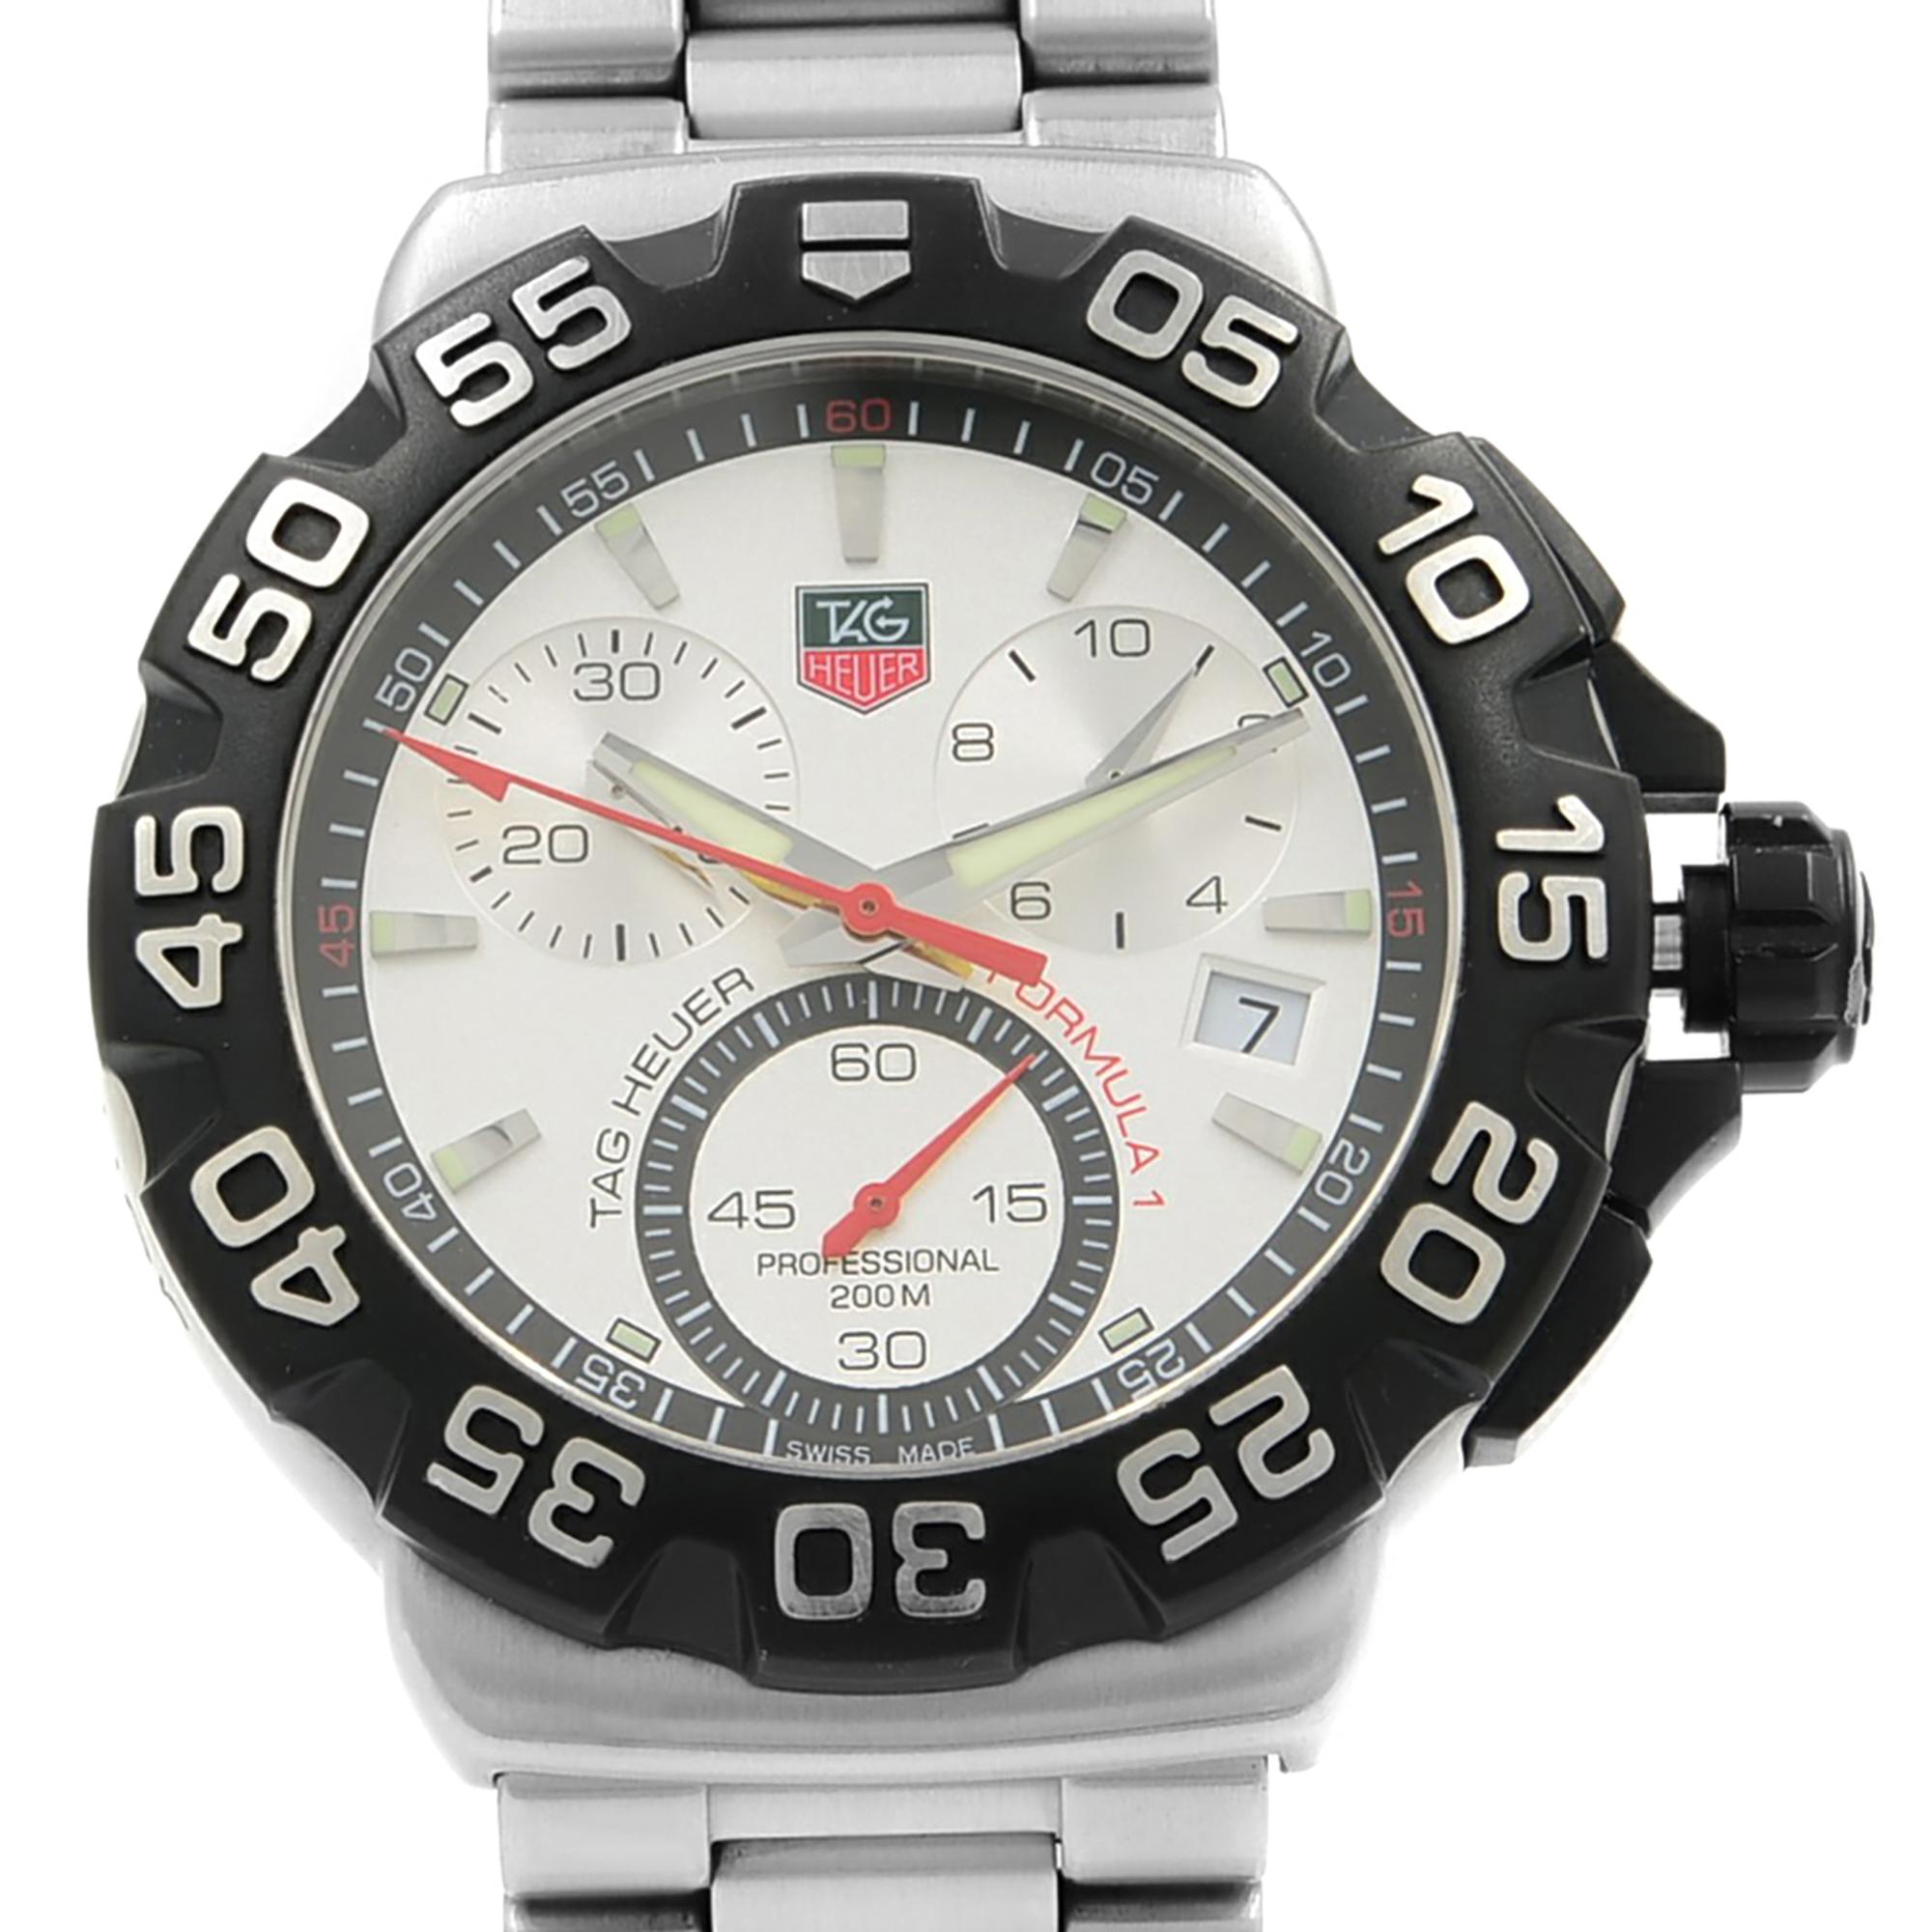 Excellent Pre-owned Condition TAG Heuer Formula One F1 41mm Steel Silver Dial Quartz Men's Watch CAH1111.BA0850. This Beautiful Timepiece Features: Stainless Steel Case with a Stainless Steel Link Bracelet. Uni-Directional Titanium Carbon Nitride